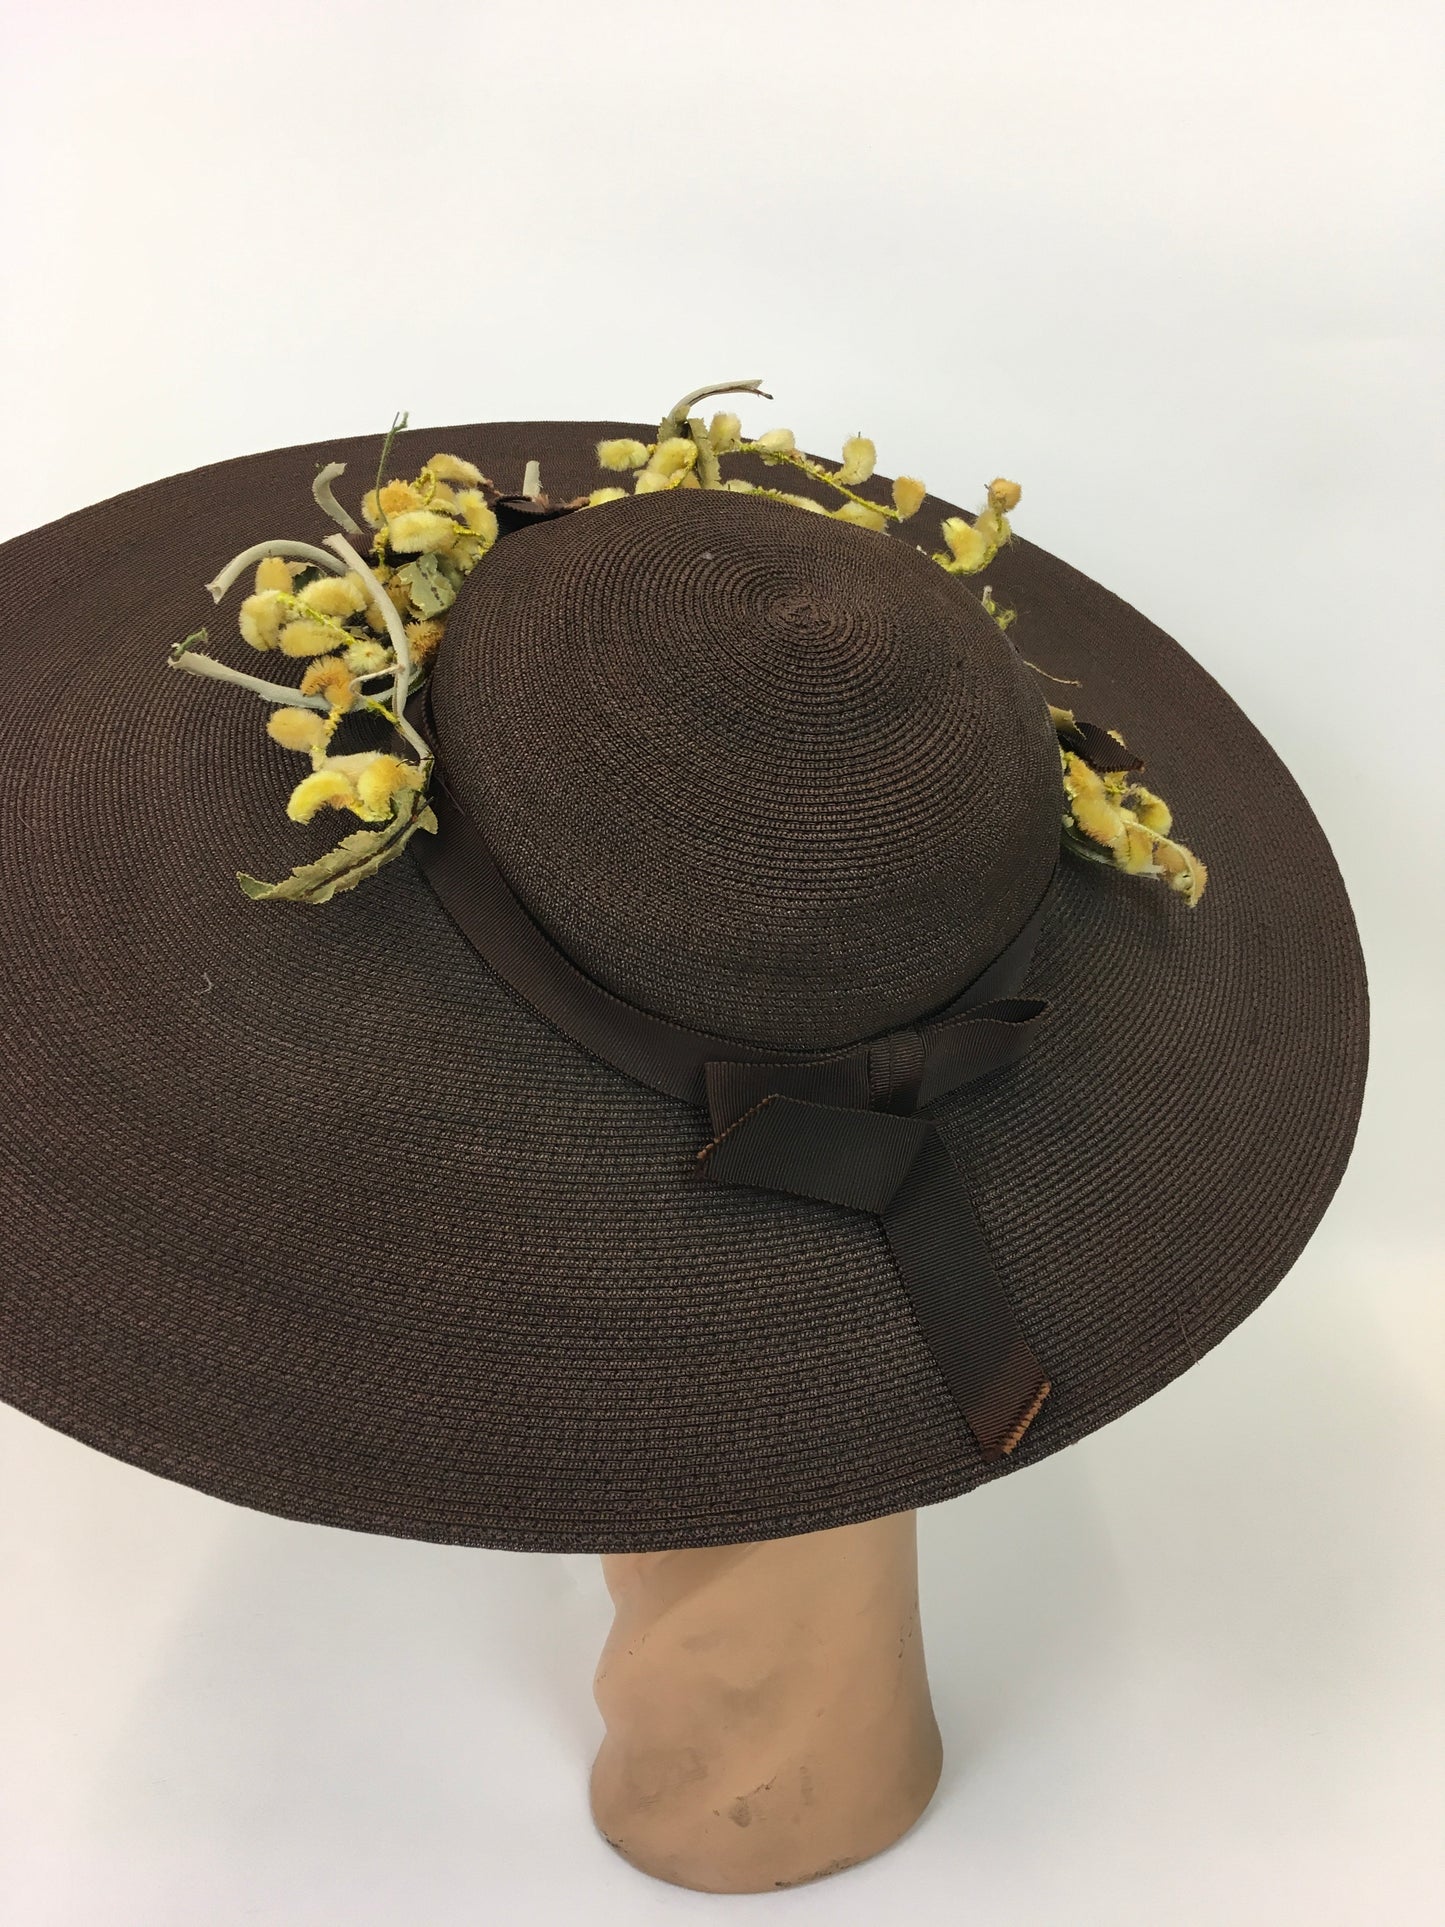 Original 1940’s SENSATIONAL Platter Hat - In Warm Brown Adorned With Velvet Mustard, Yellow & Chartreuse Buds and Flowers